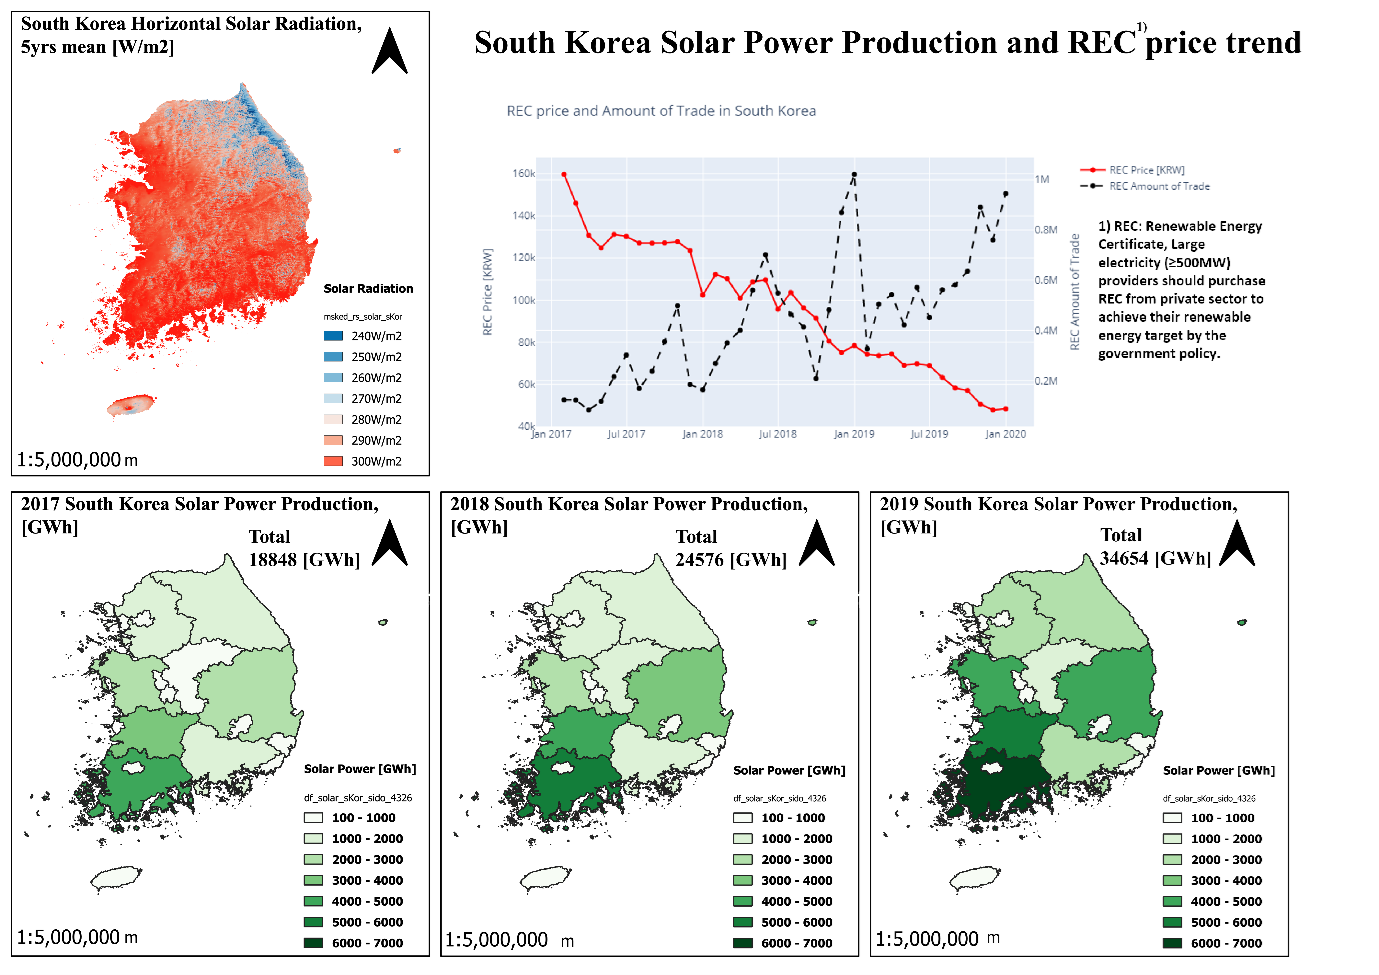 South Korea Solar Power Production and REC Price Trend